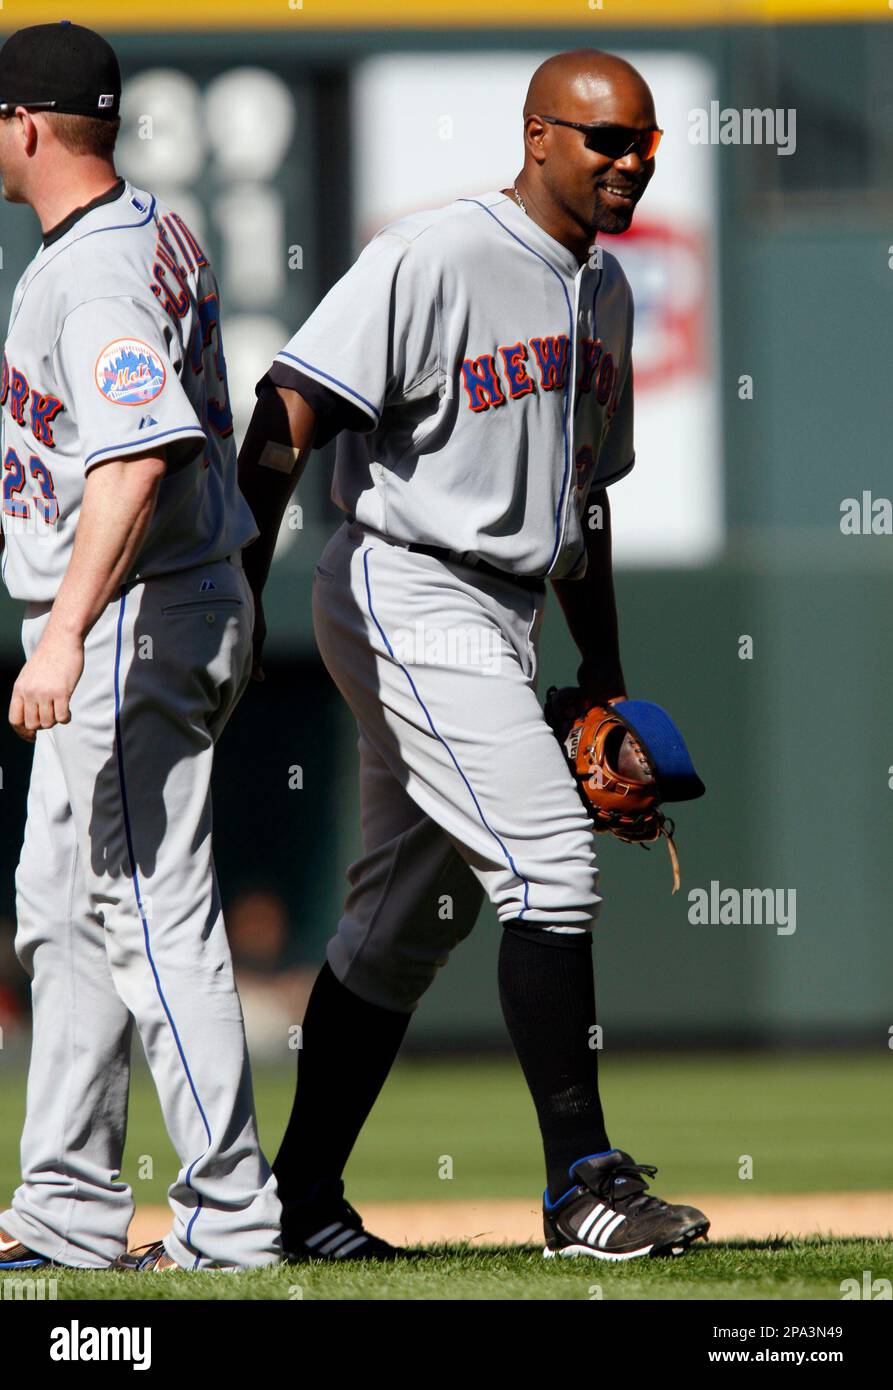 New York Mets first baseman Carlos Delgado, right, smiles after he